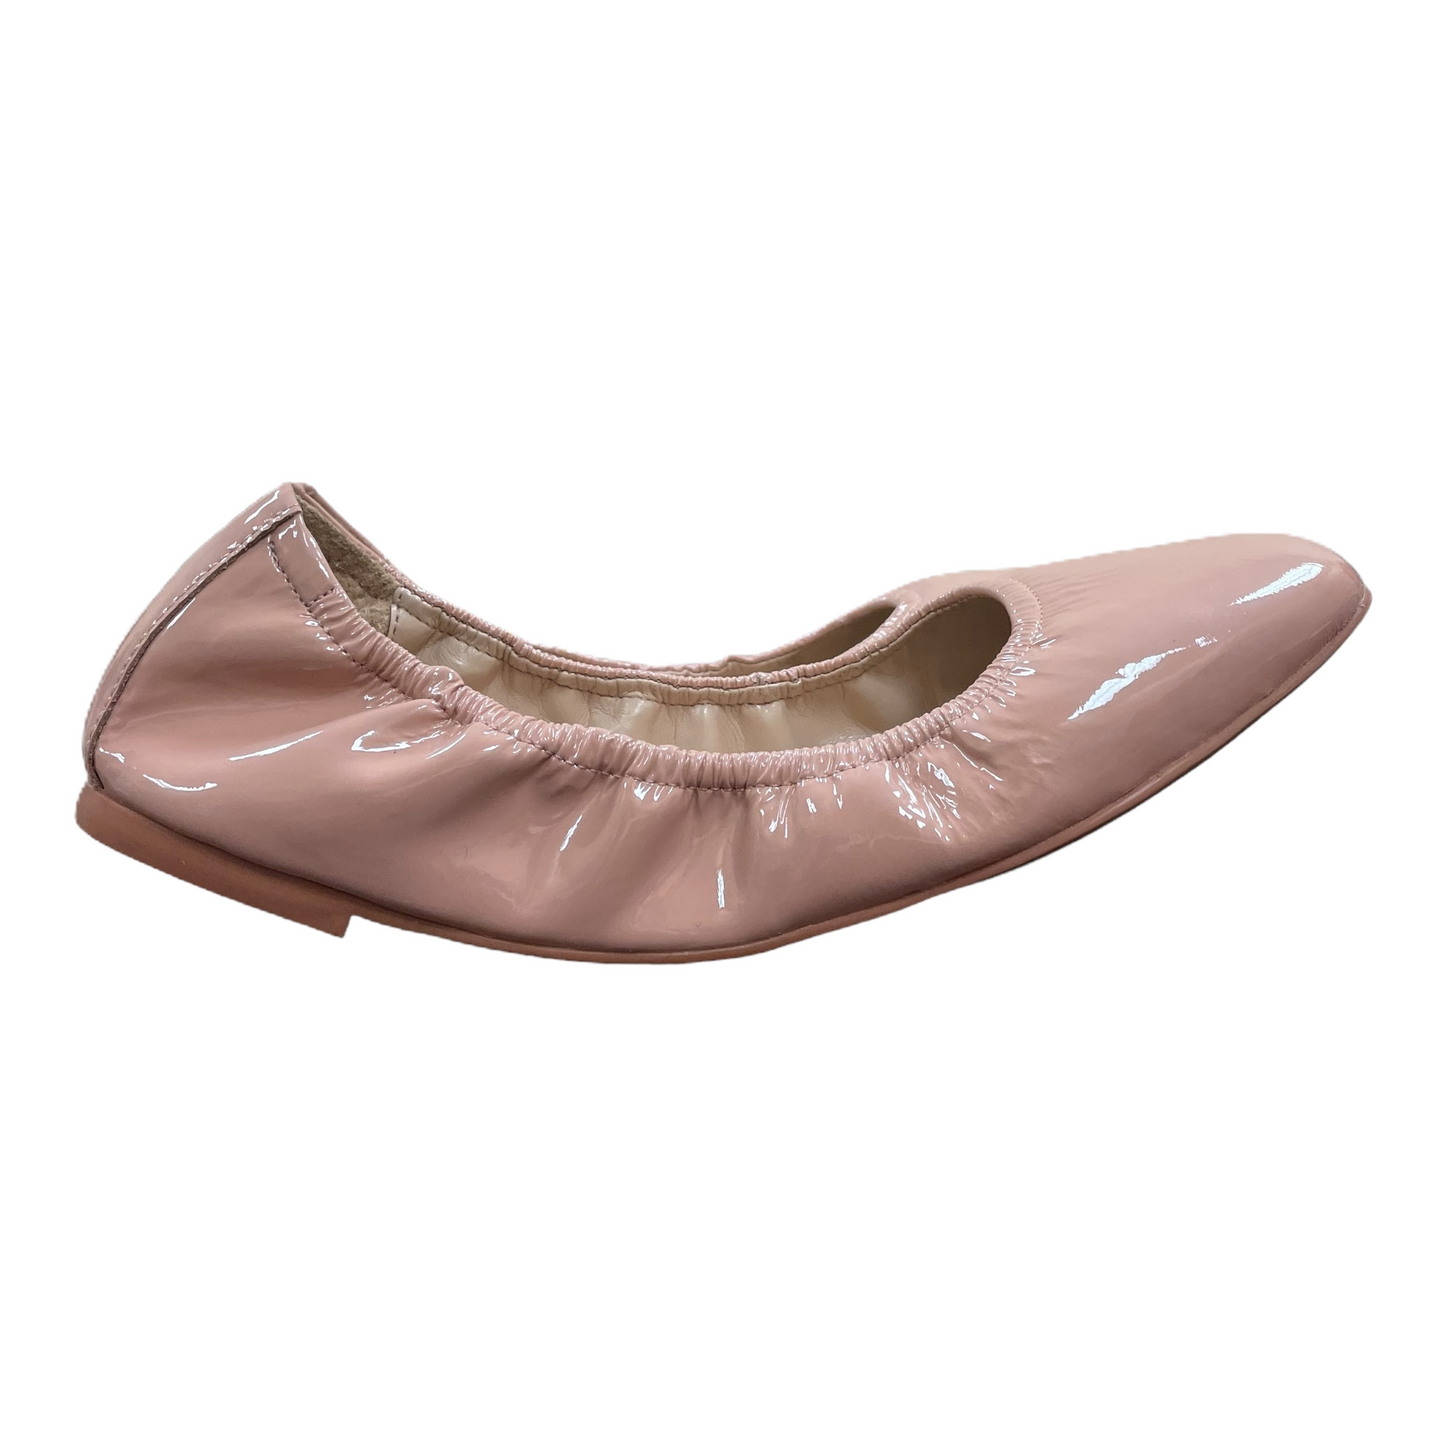 Pink Shoes Flats By Vince Camuto, Size: 11